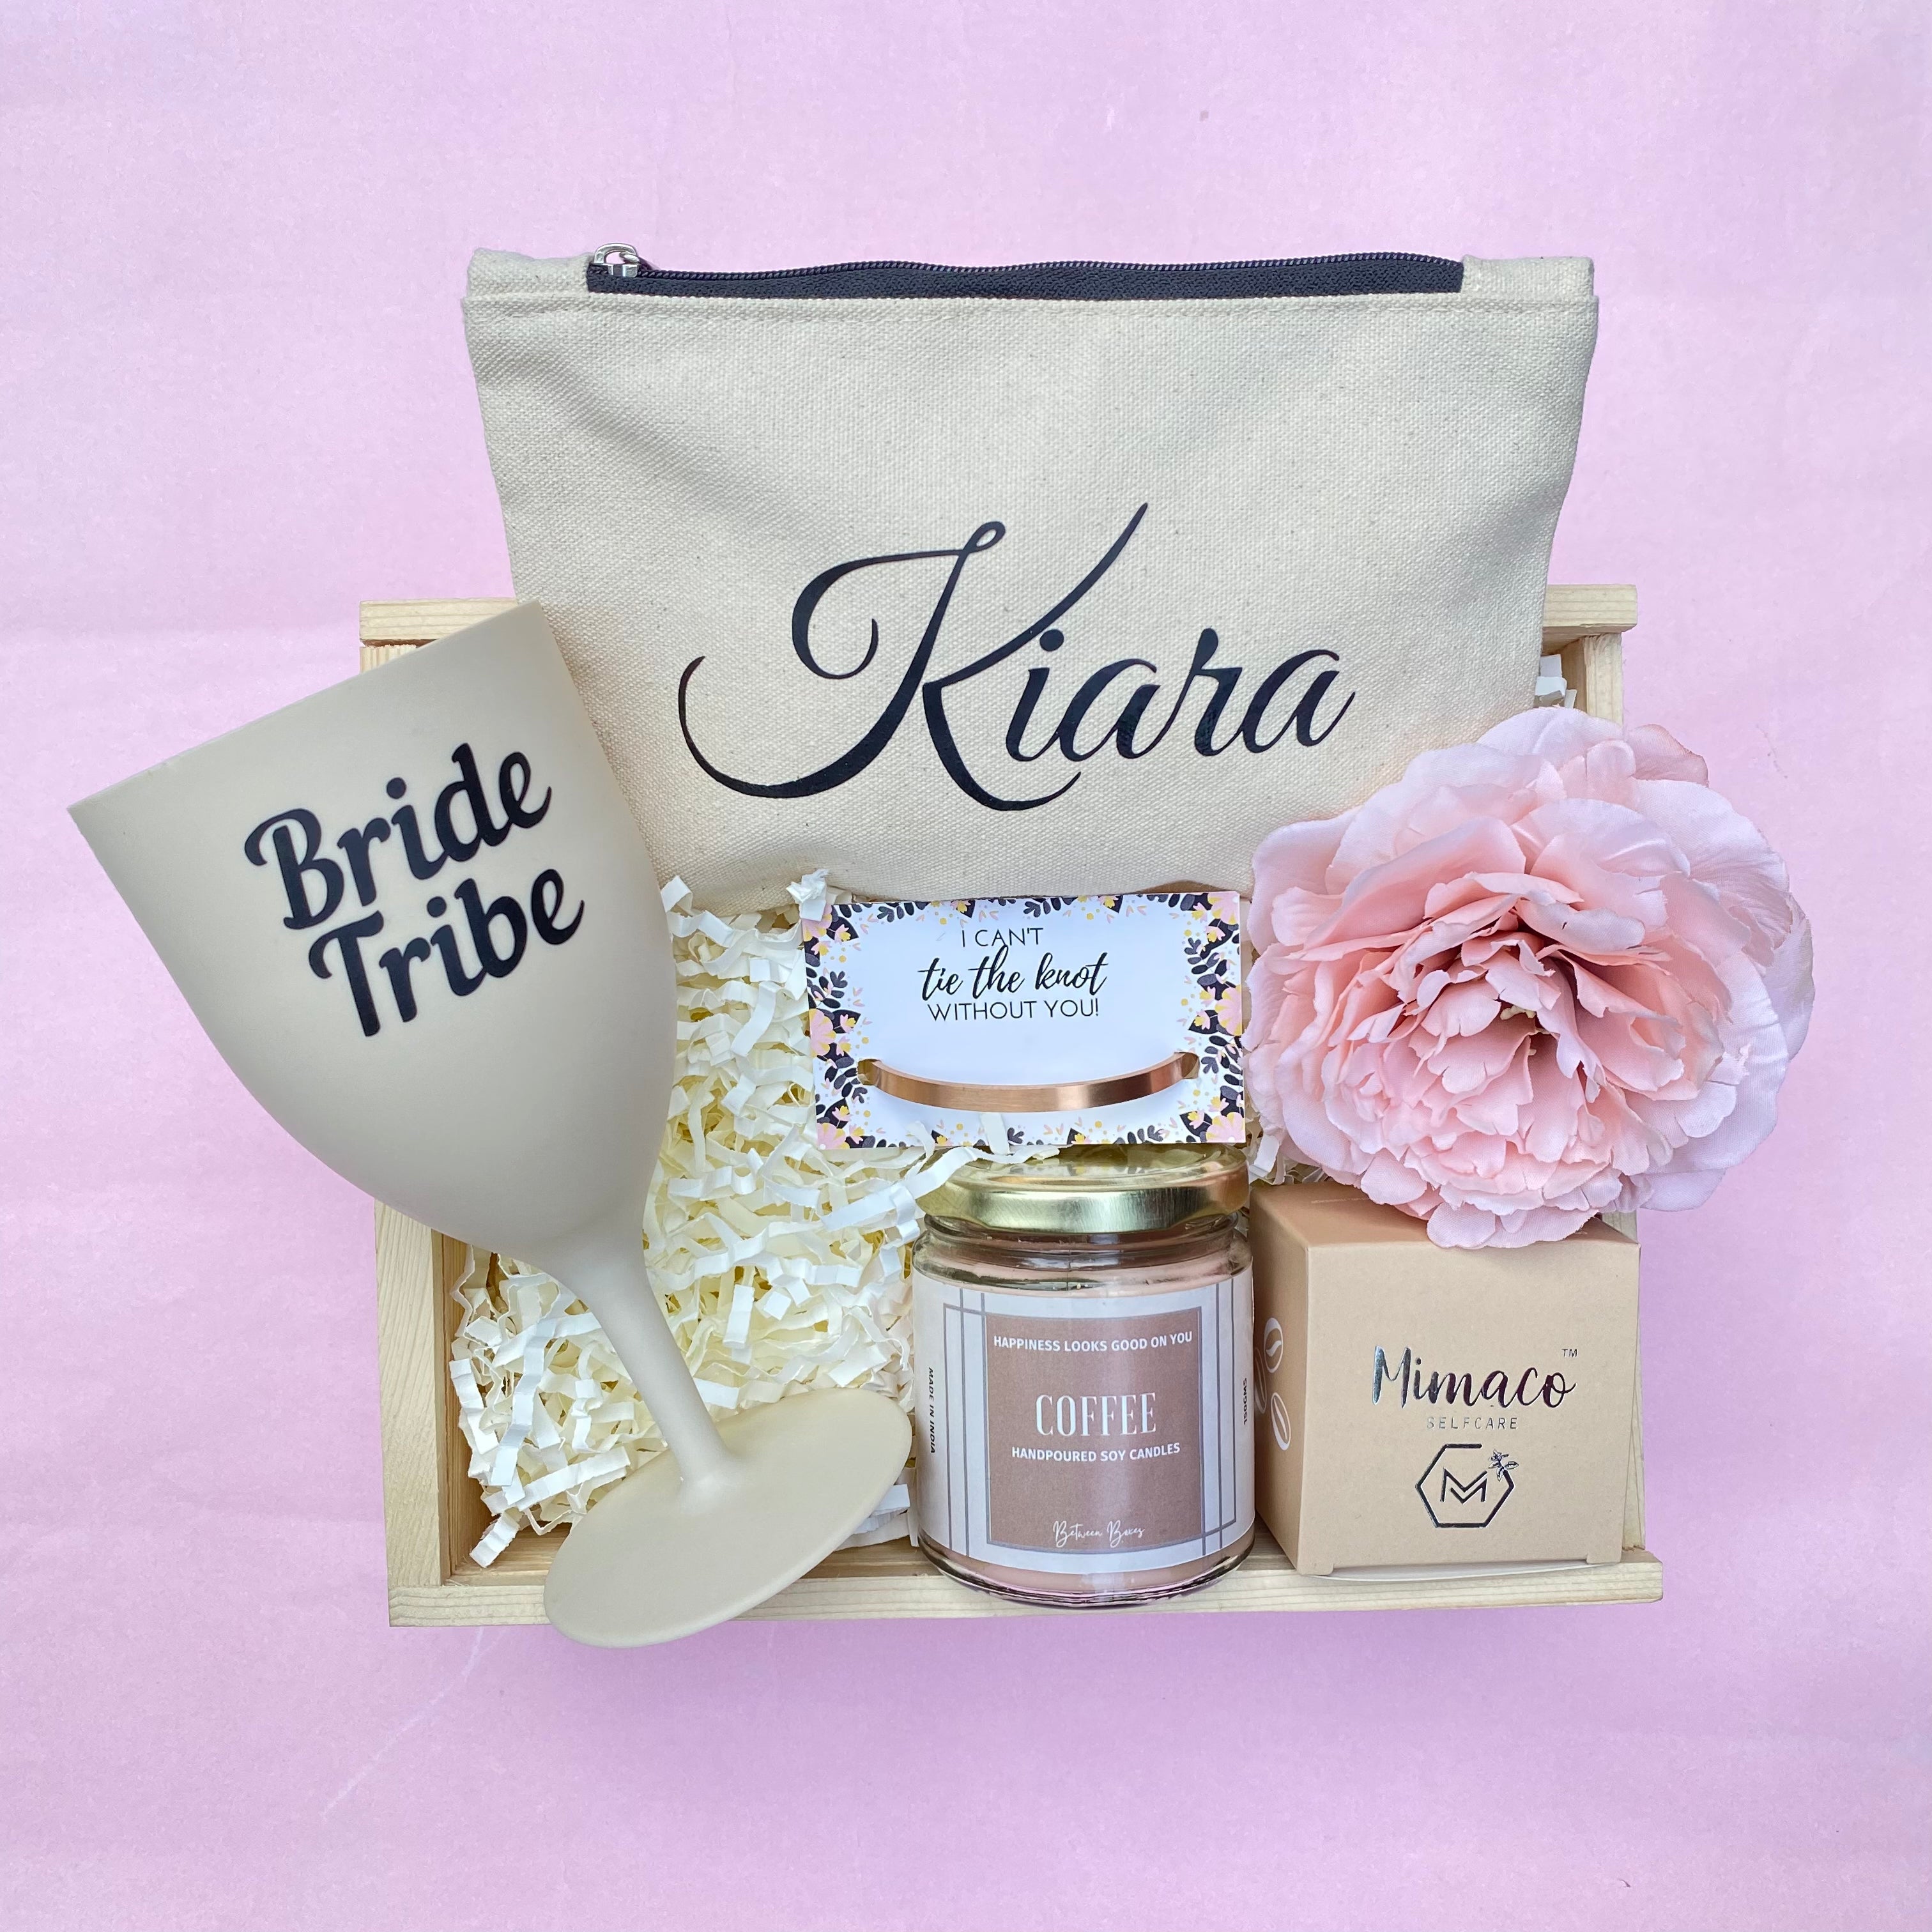 The Best Bridesmaids Gifts - The Homemade Bride